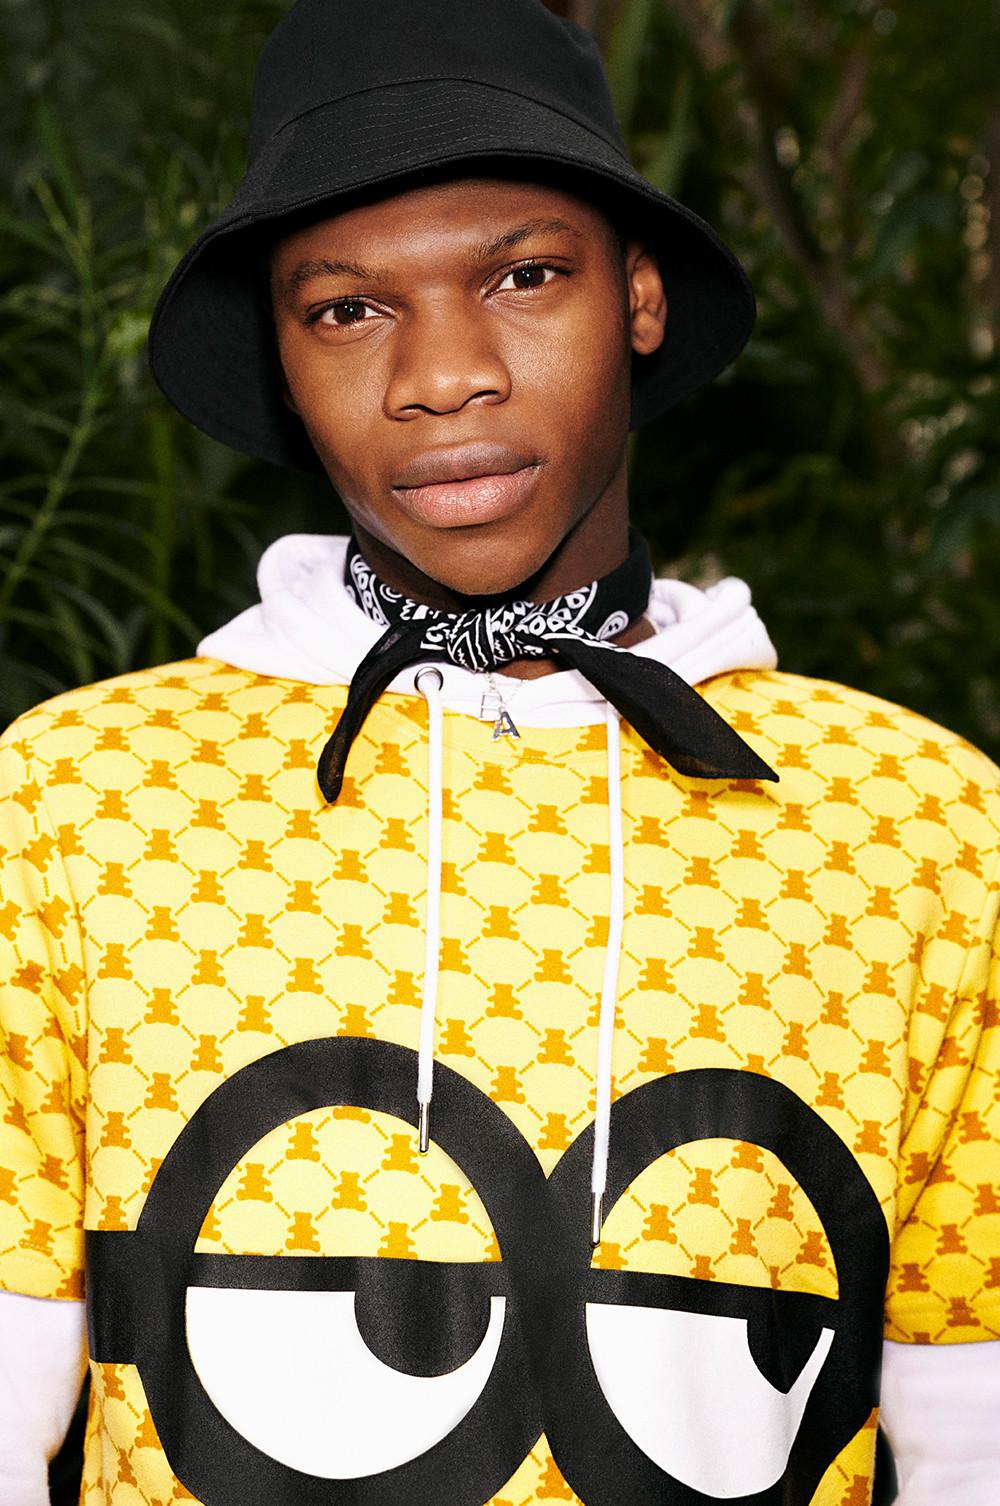 image 3 bobby abley